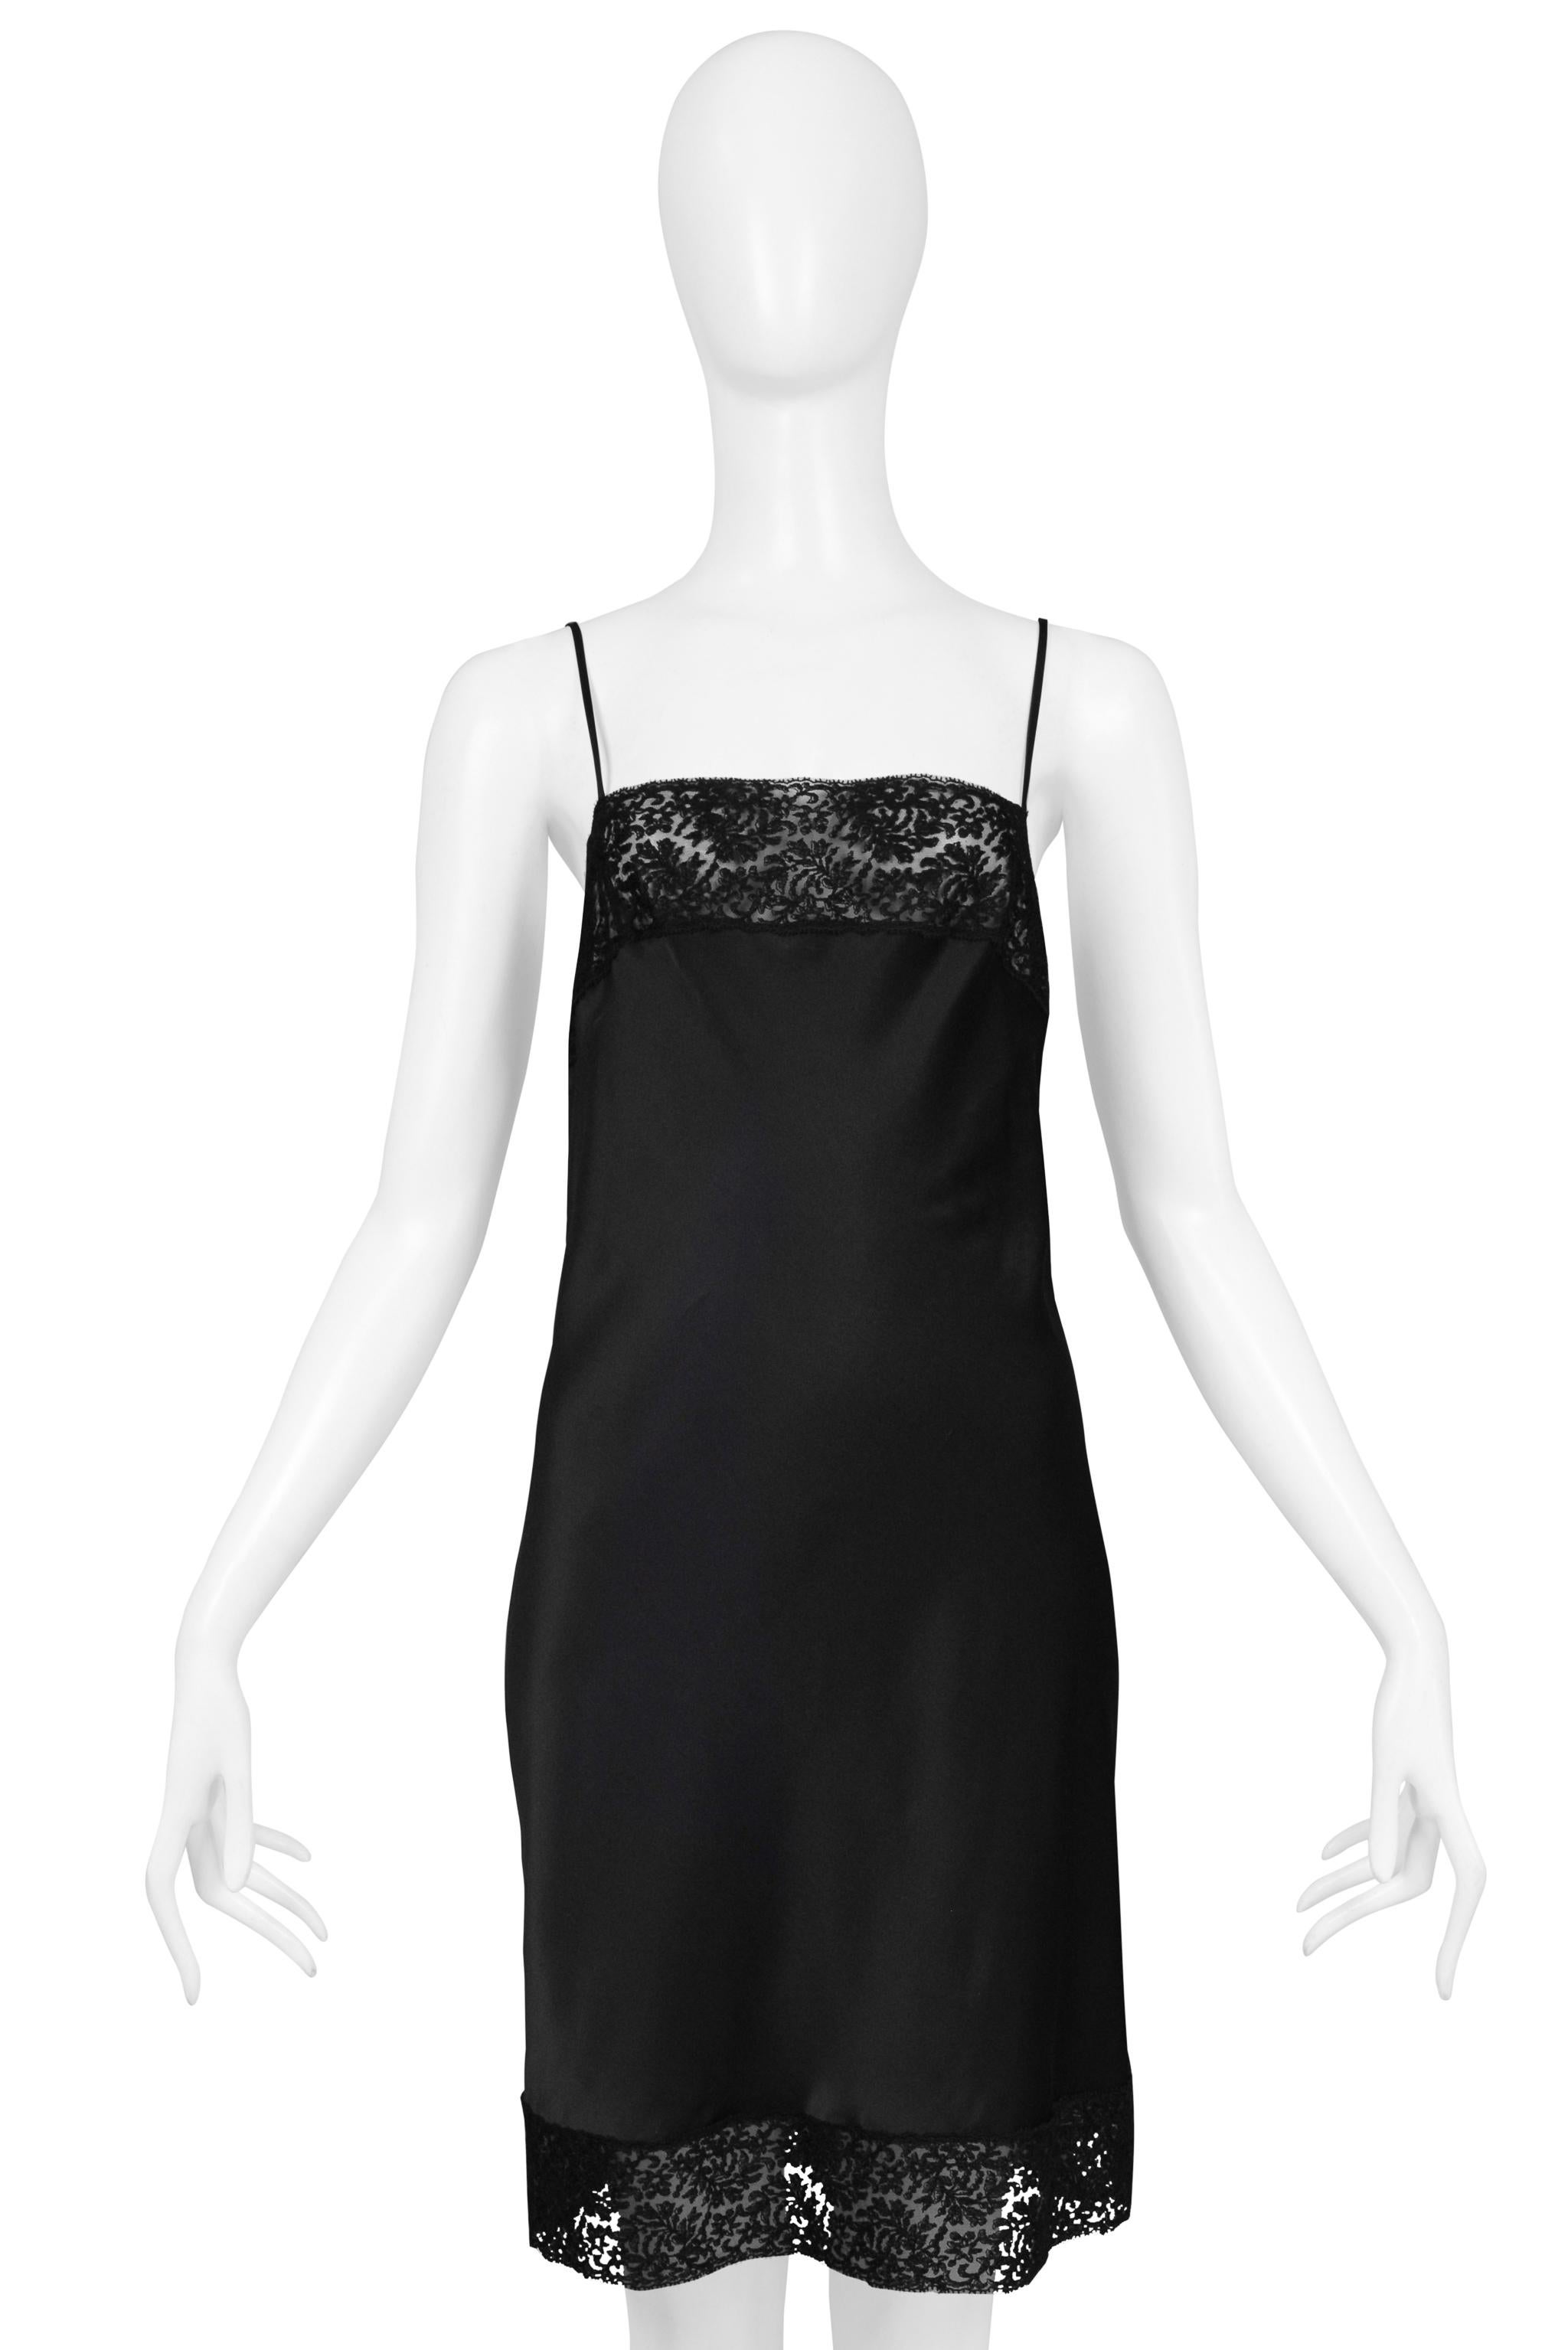 Christian Dior By John Galliano Black Silk And Lace Slip Dress 1997 For Sale 1